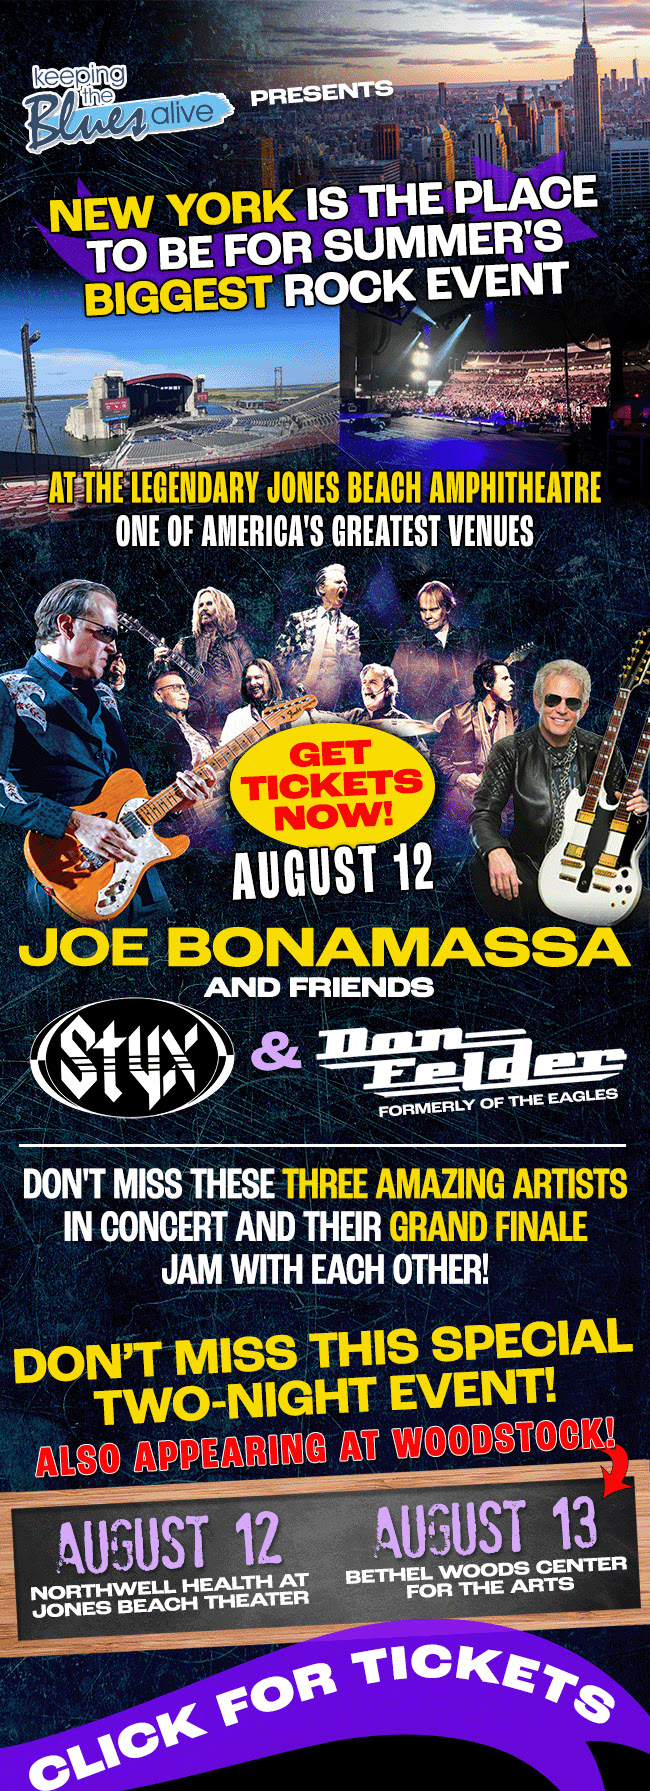 Don't miss the summer rock event of the year when Joe takes the stage with Styx and Don Felder!